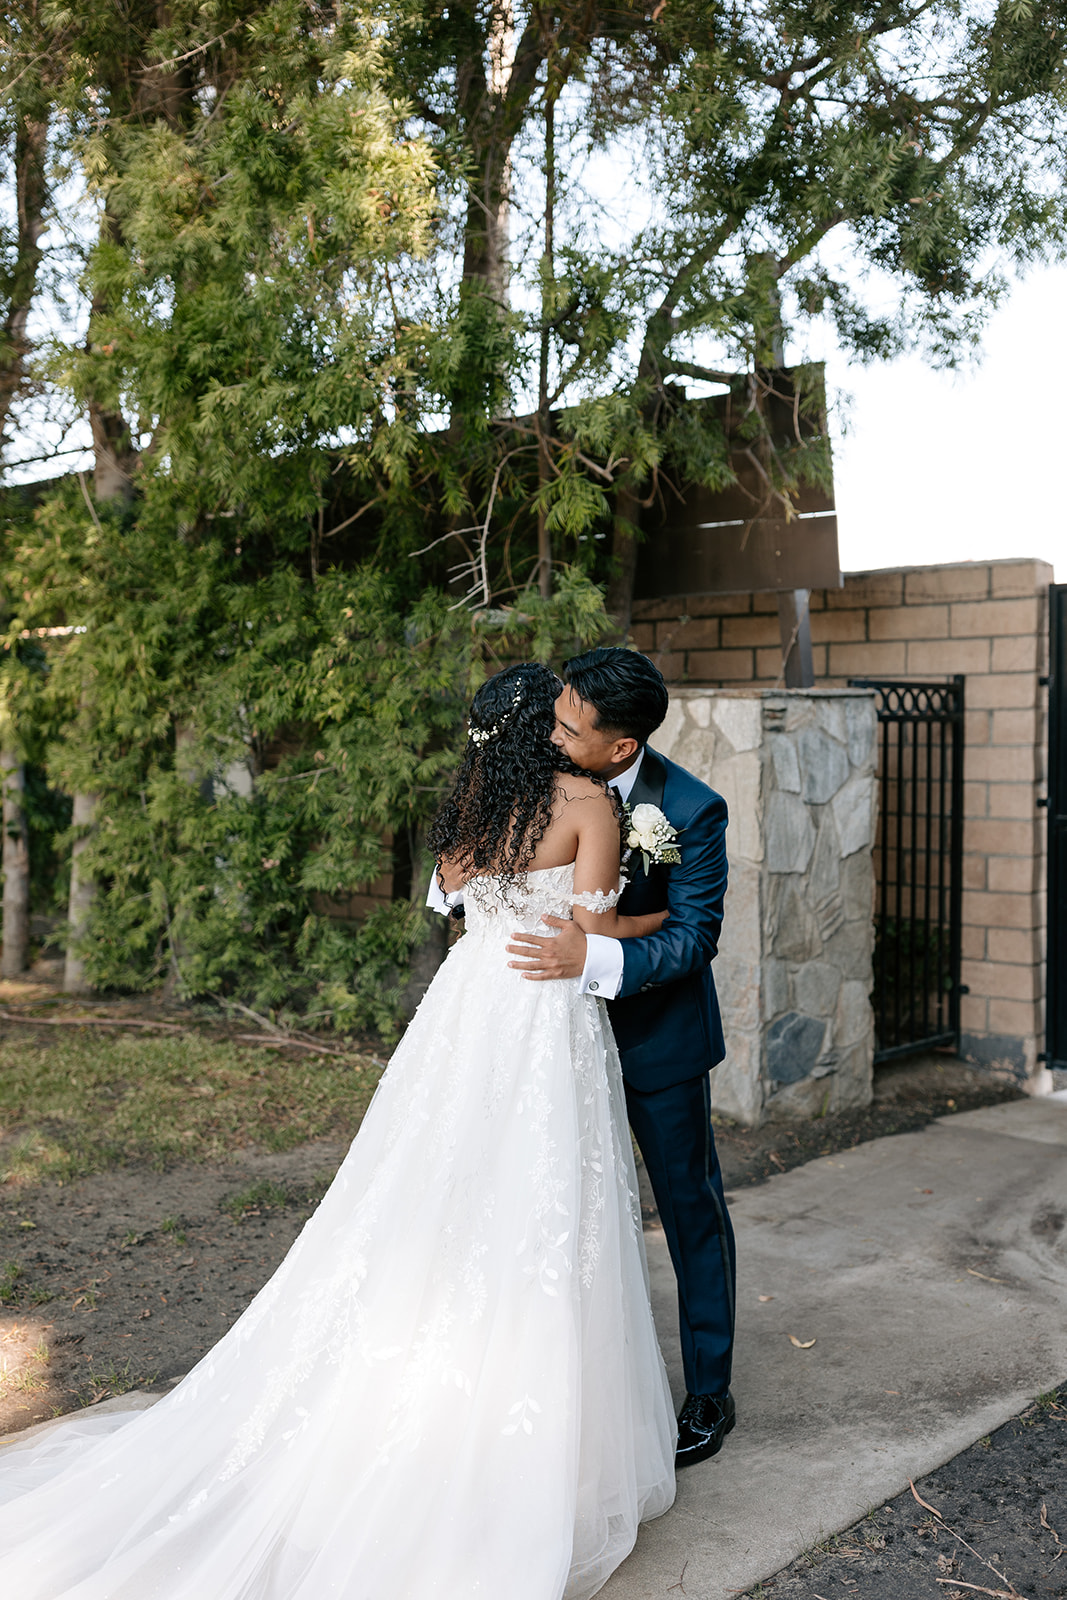 griffith house wedding anaheim california navy blue wedding suit wedding attire wedding dress wedding tux suit and tie